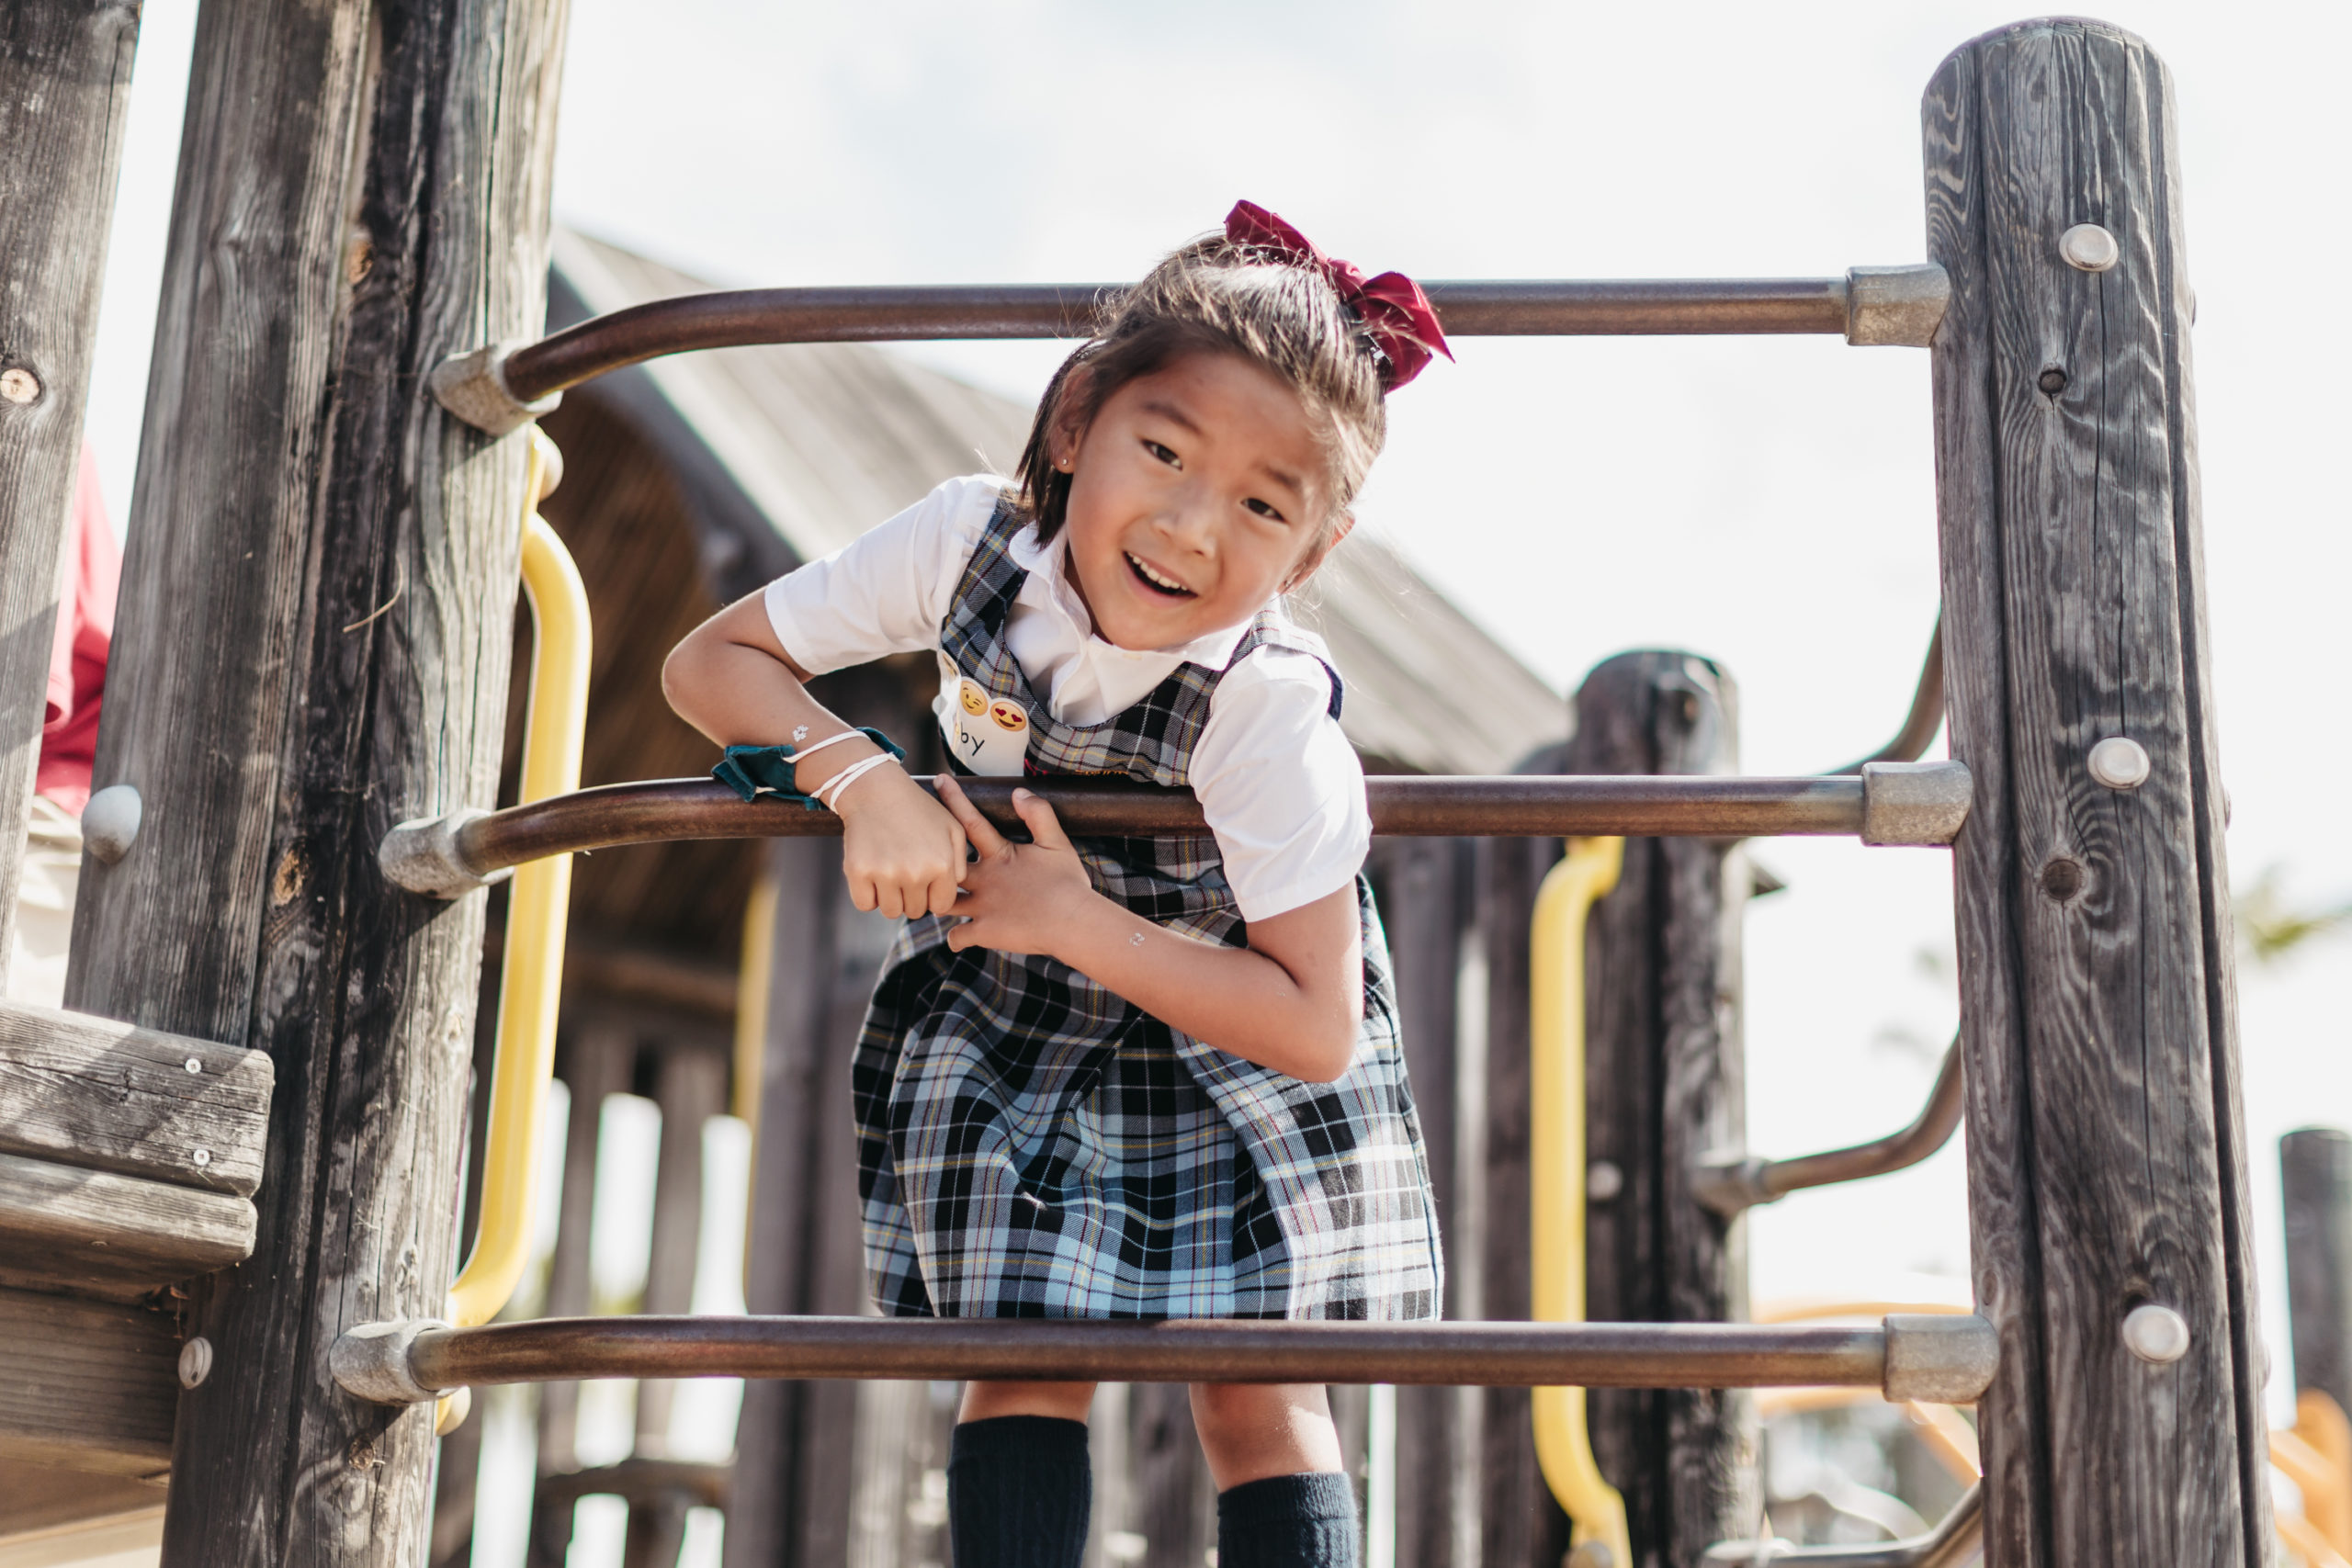 SFC kindergartener smiles for the camera while playing on the playground.